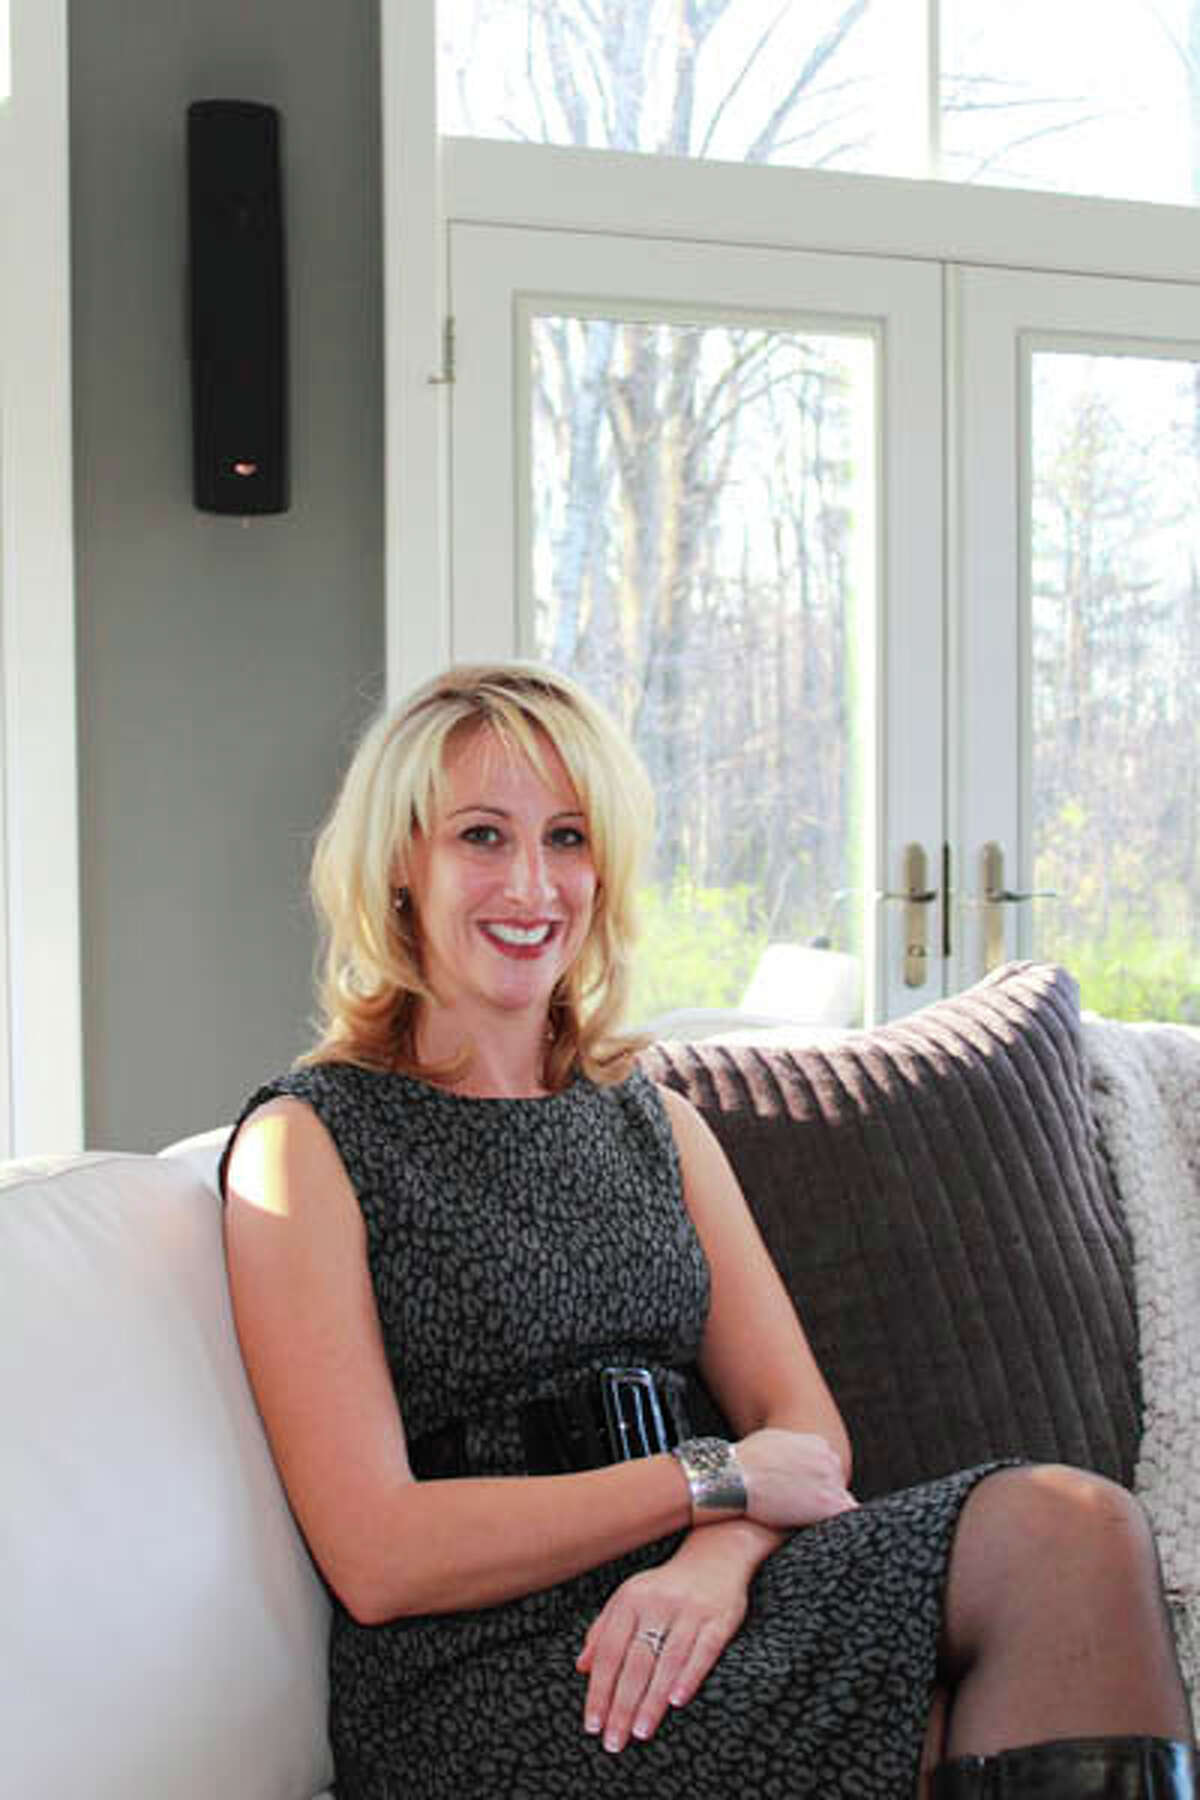 Sandra Fox's Clifton Park home, built by Theodore J. Cillis III of Cillis Builders, focuses on distinctive touches to create a custom splendor. (Nancy Bruno/Life@Home) Click here to read the story.